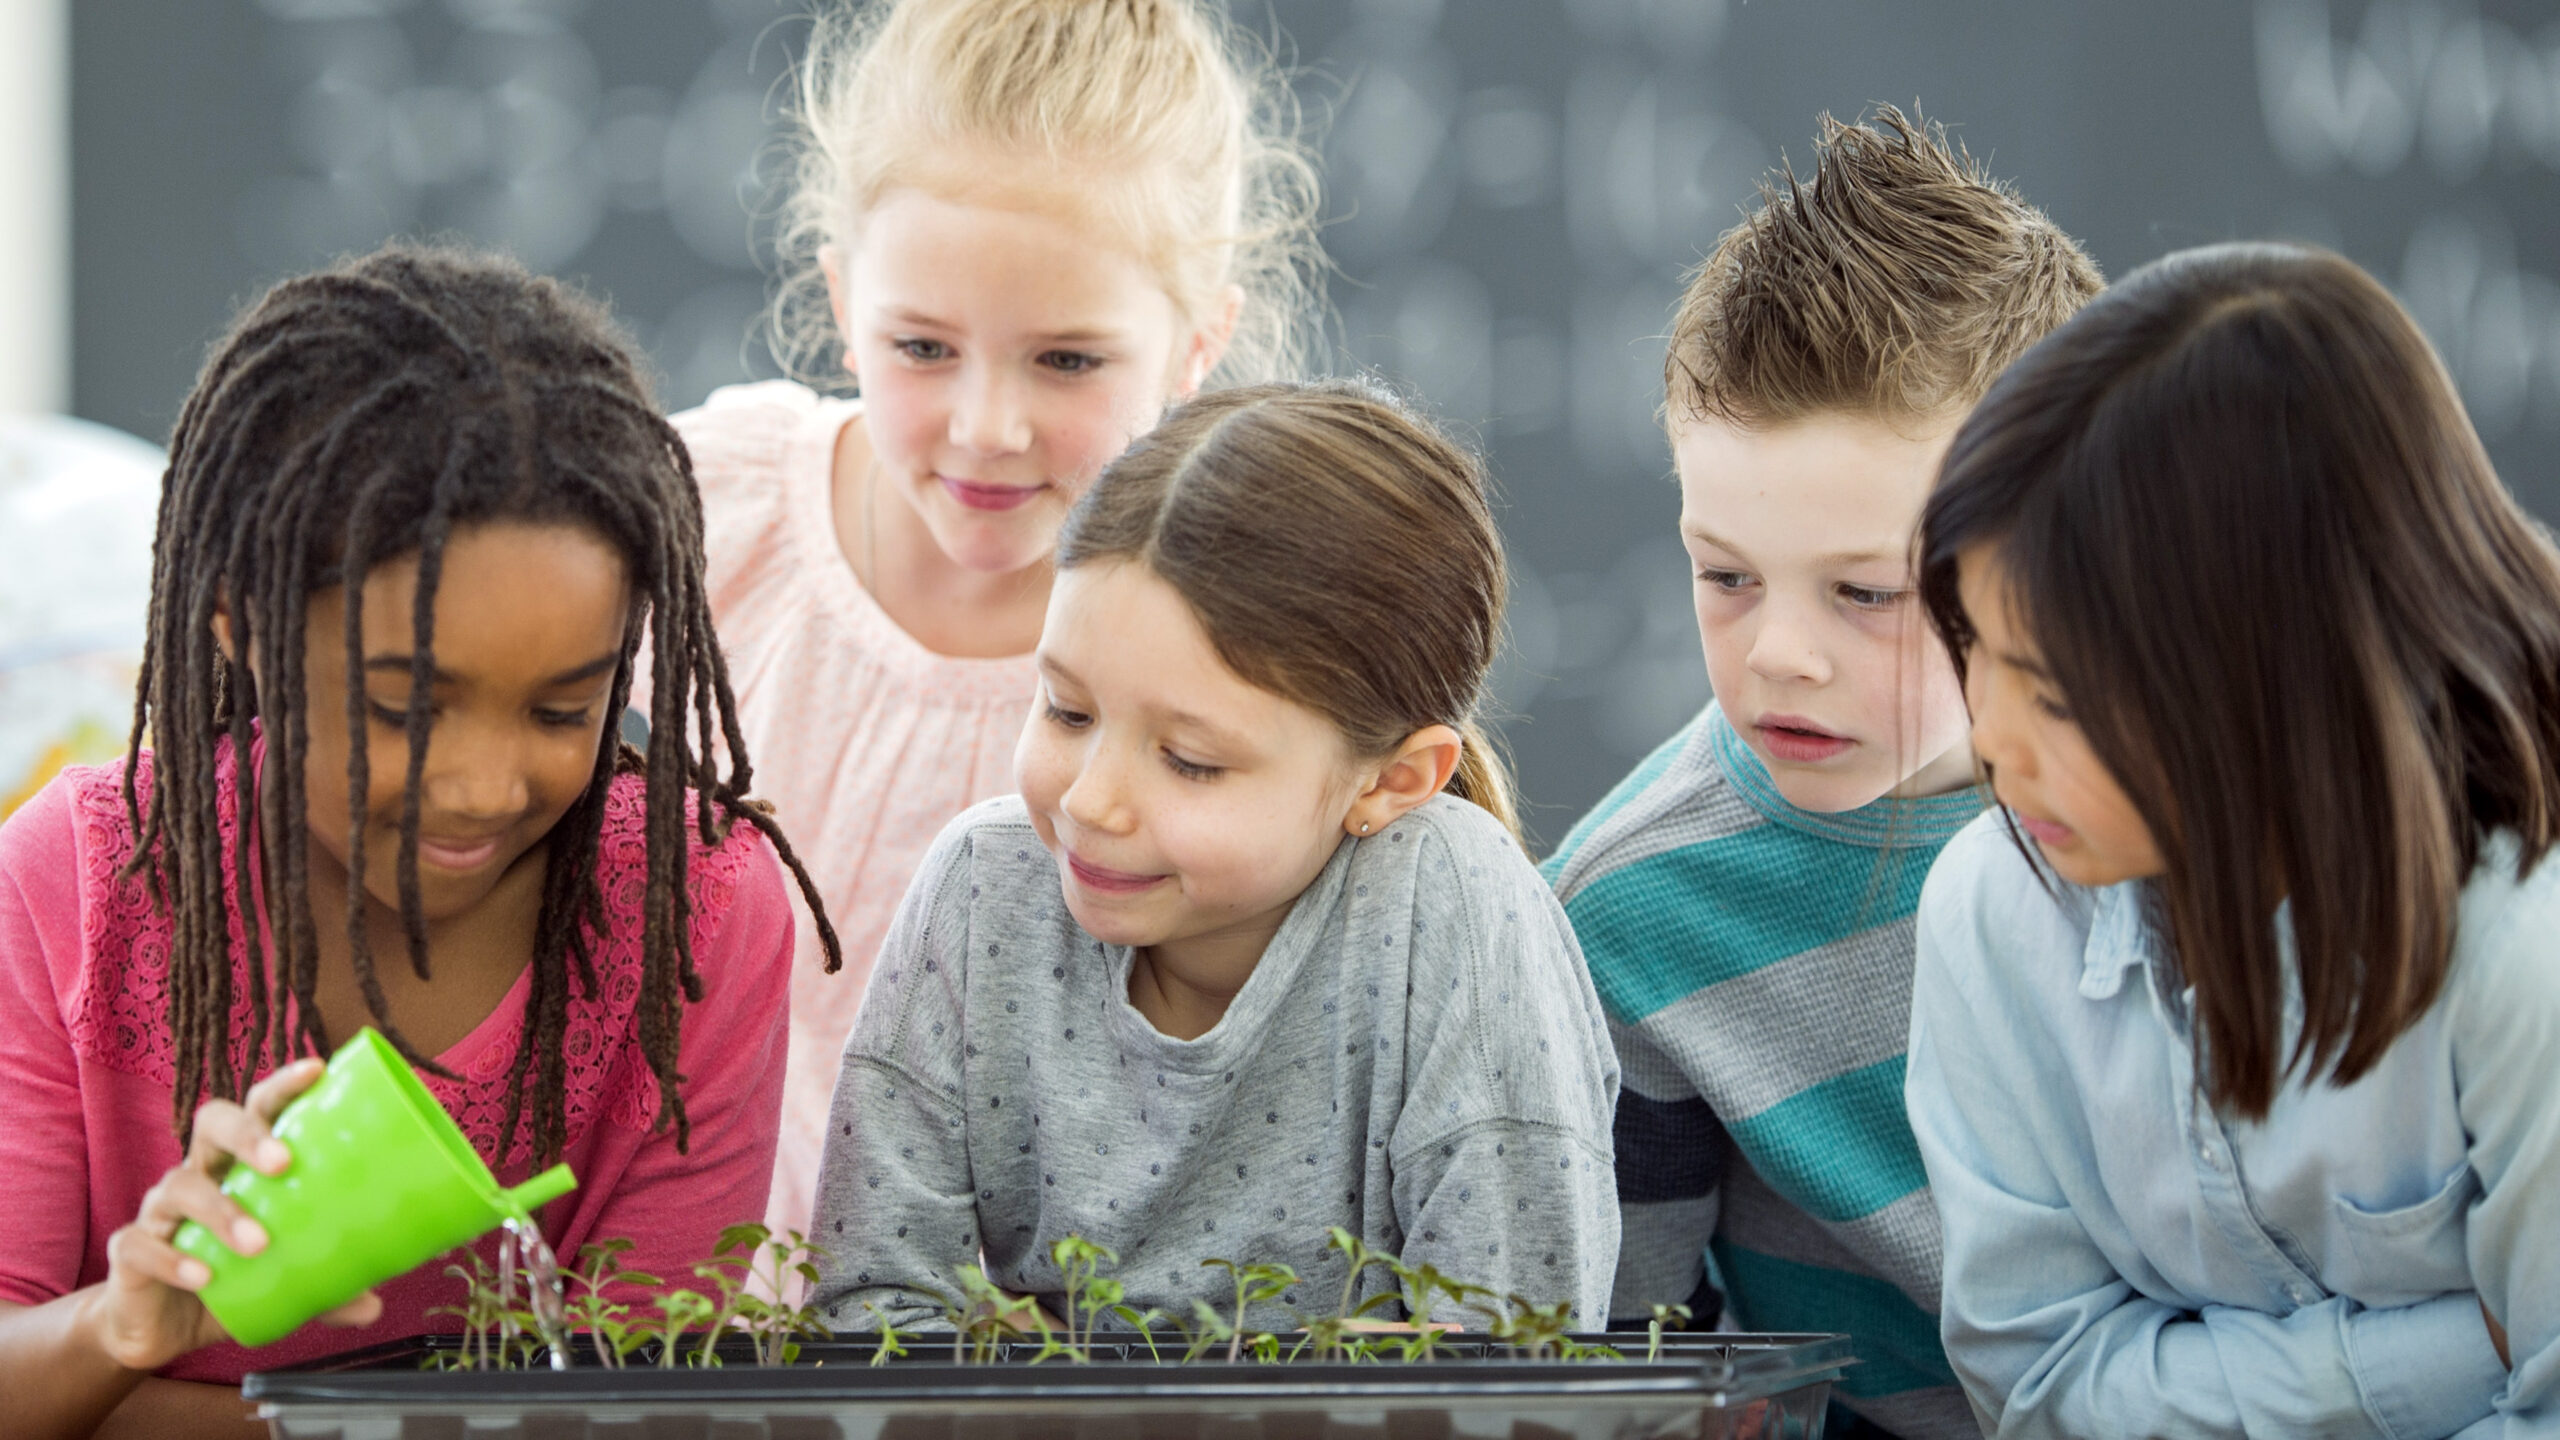 A group of children who are watering a small garden together